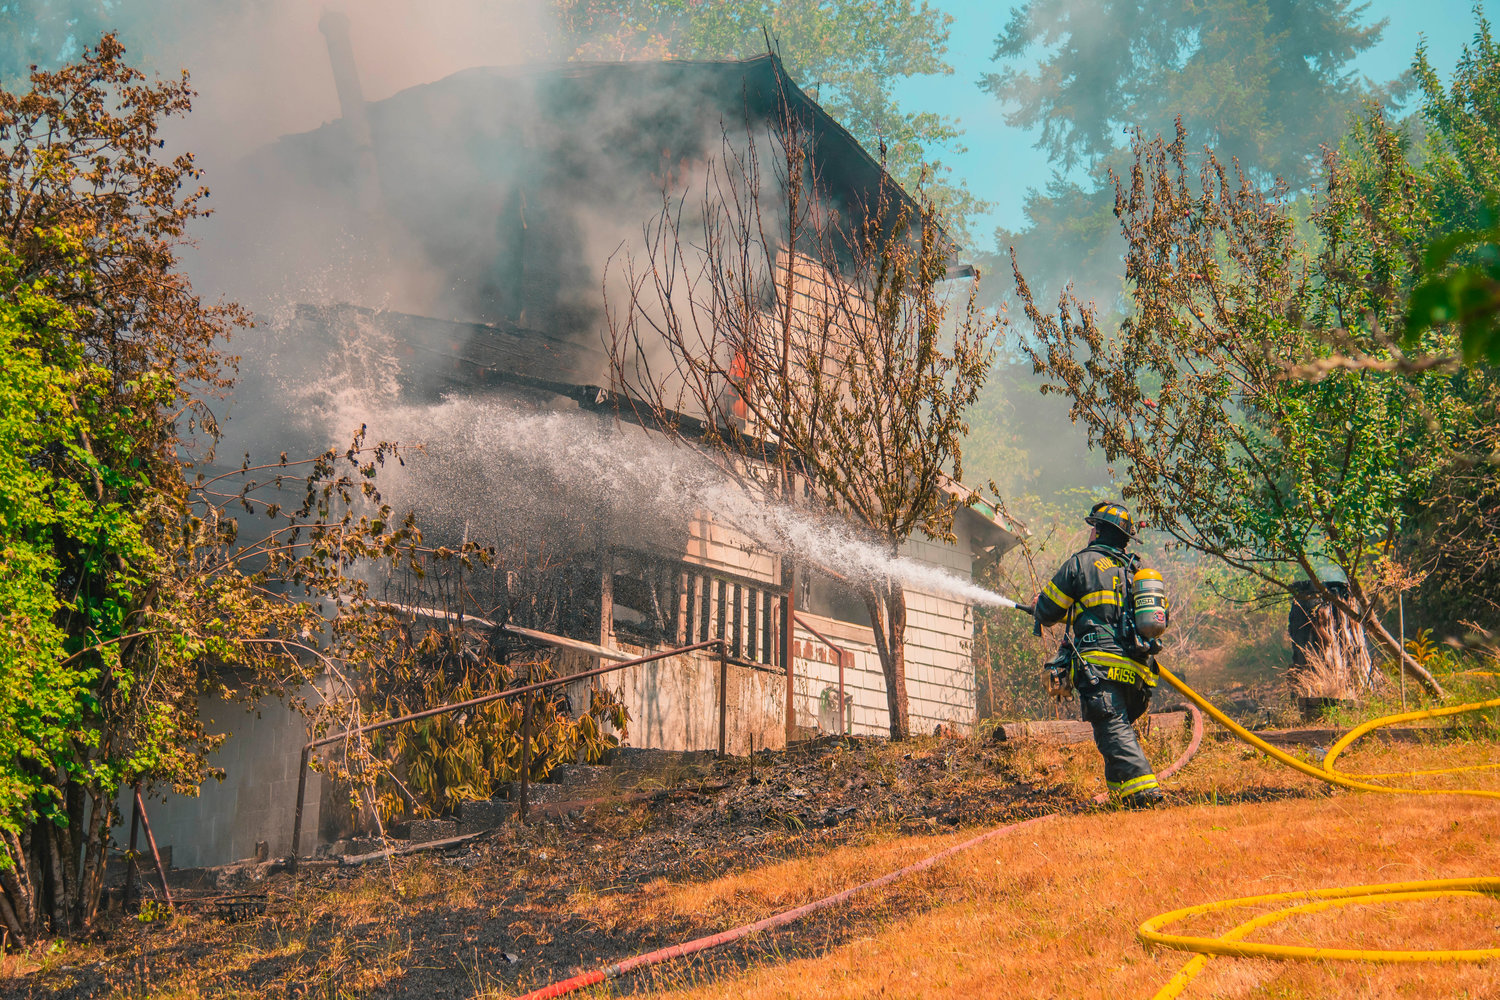 A Riverside Fire Authority firefighter uses a hose to put out flames at a residential structure on East Third Street in Centralia on Thursday.